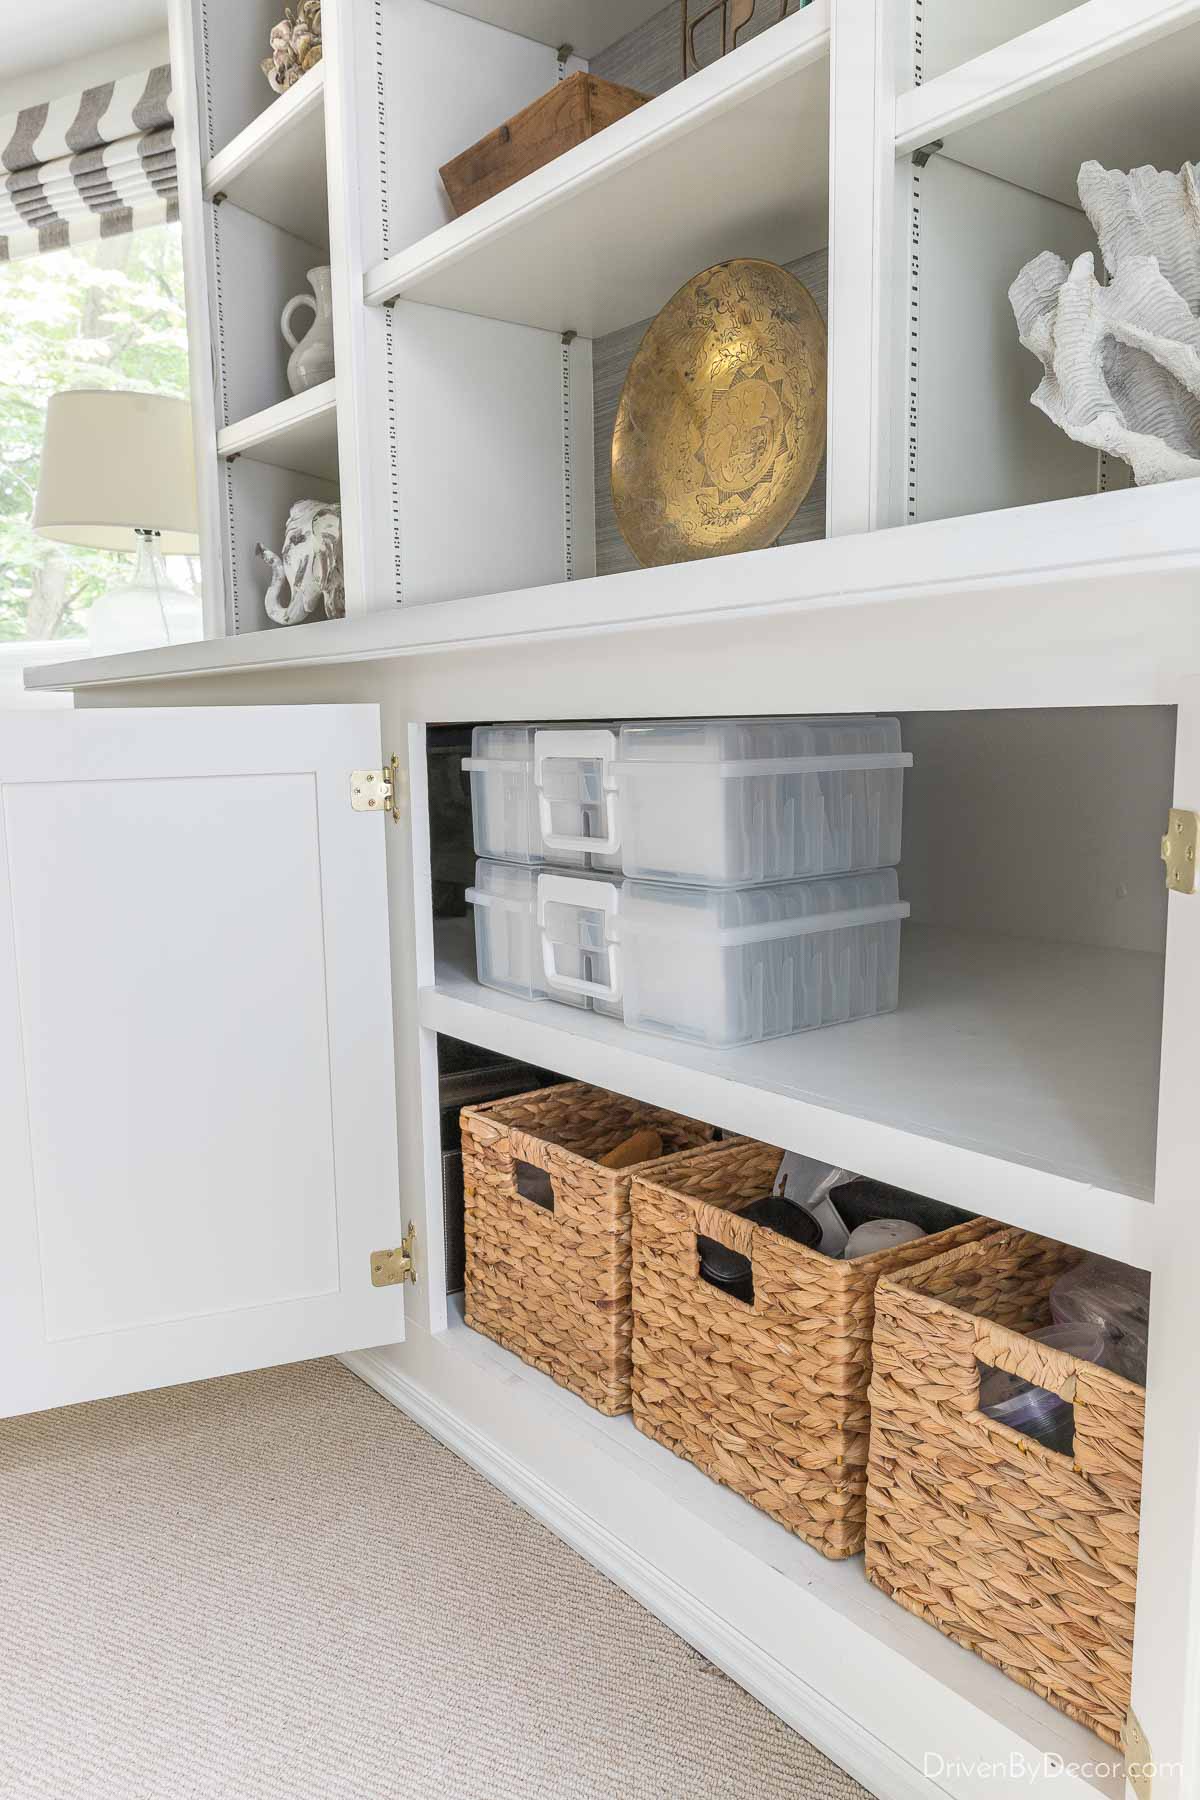 20 Home Organization Ideas For A Clutter-Free Home - Driven by Decor